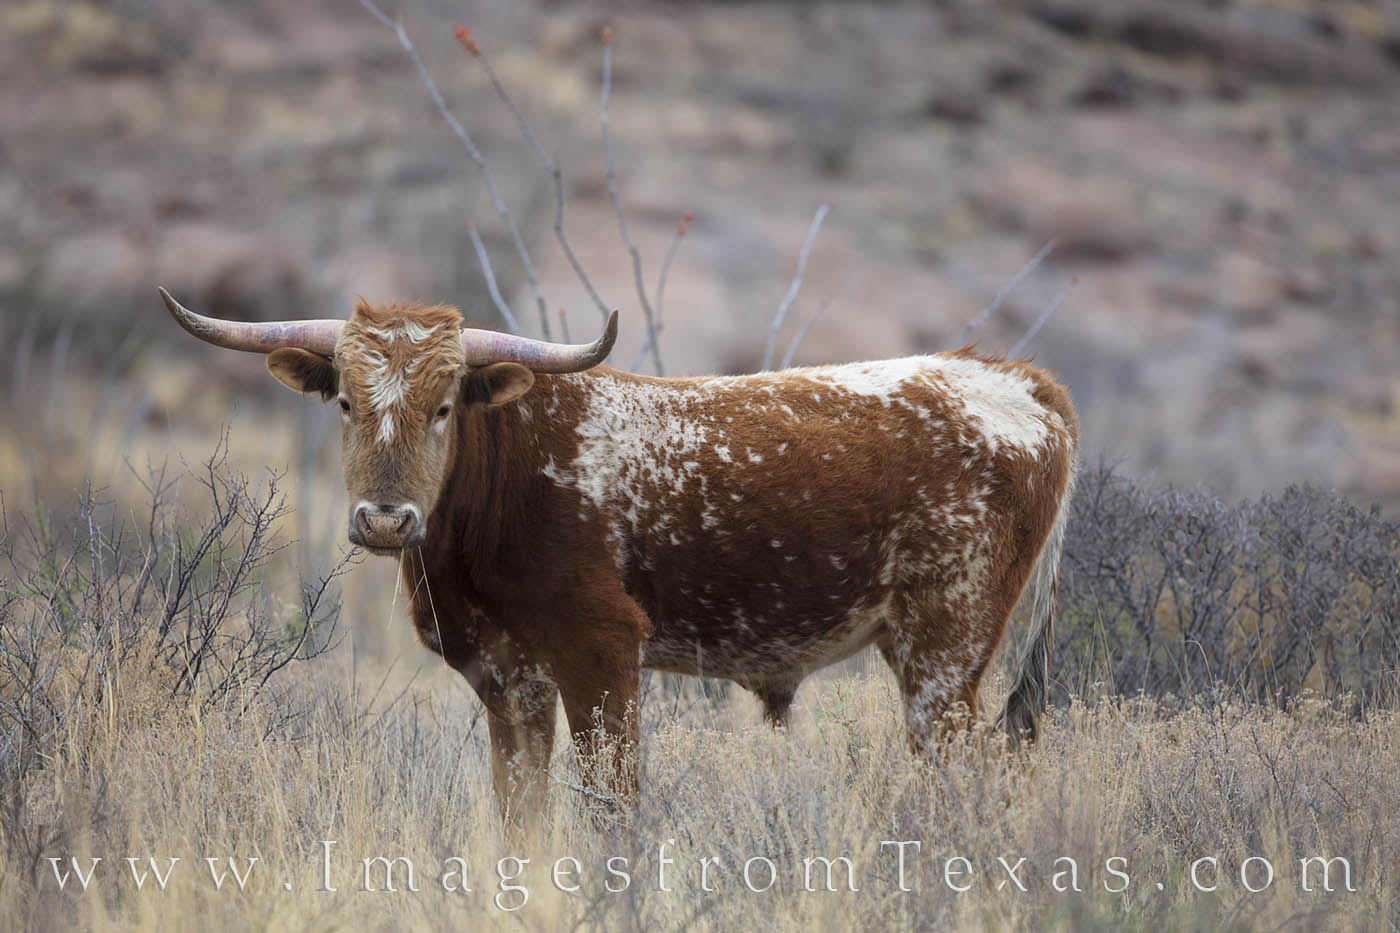 Wildlife in Big Bend Ranch State Park comes in all shapes and sizes. This one just happes to be pretty large - a free roaming...